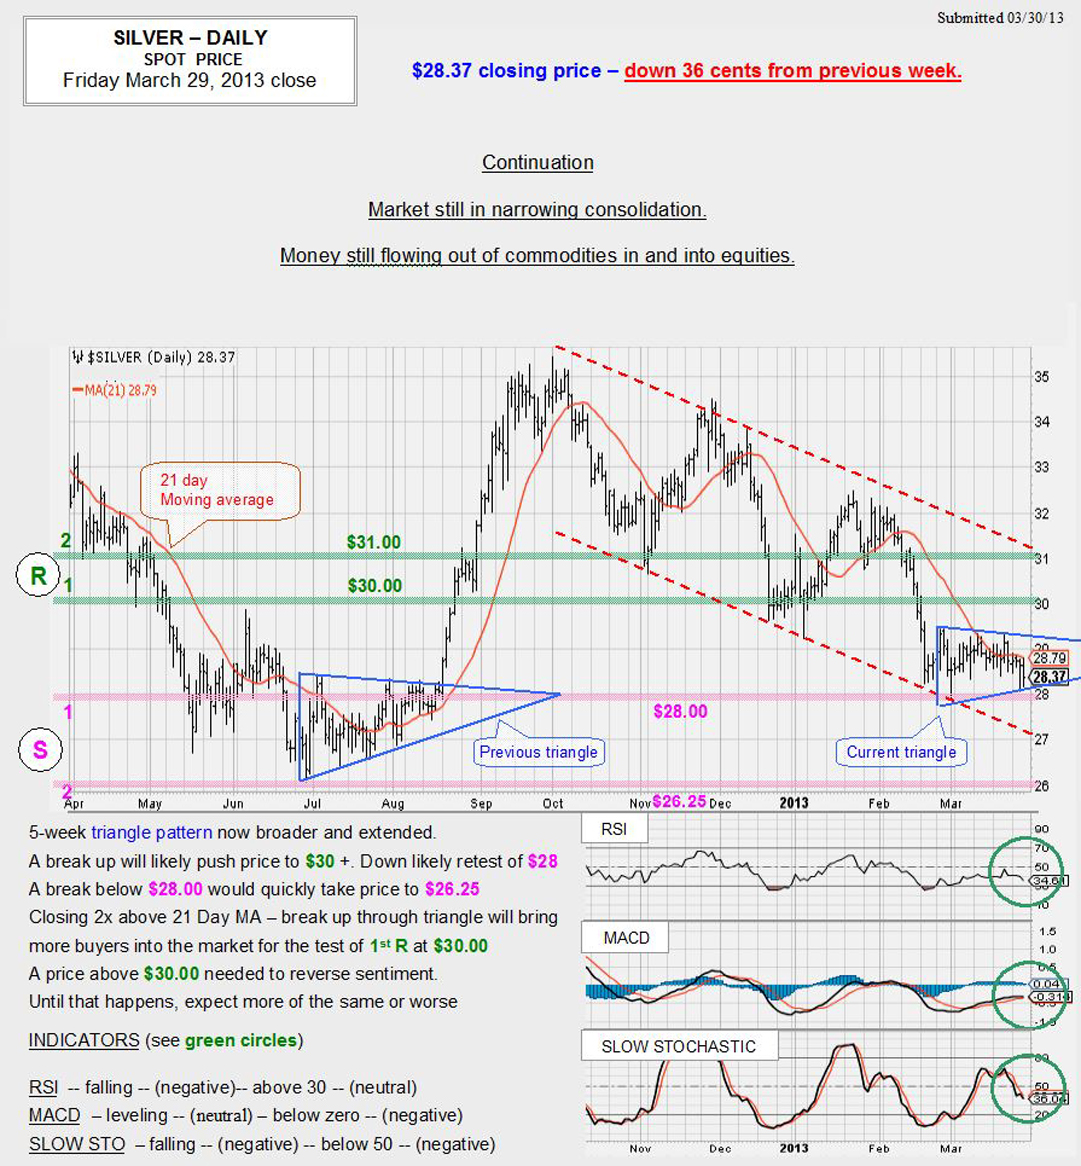 Mar. 29, 2013 chart & commentary